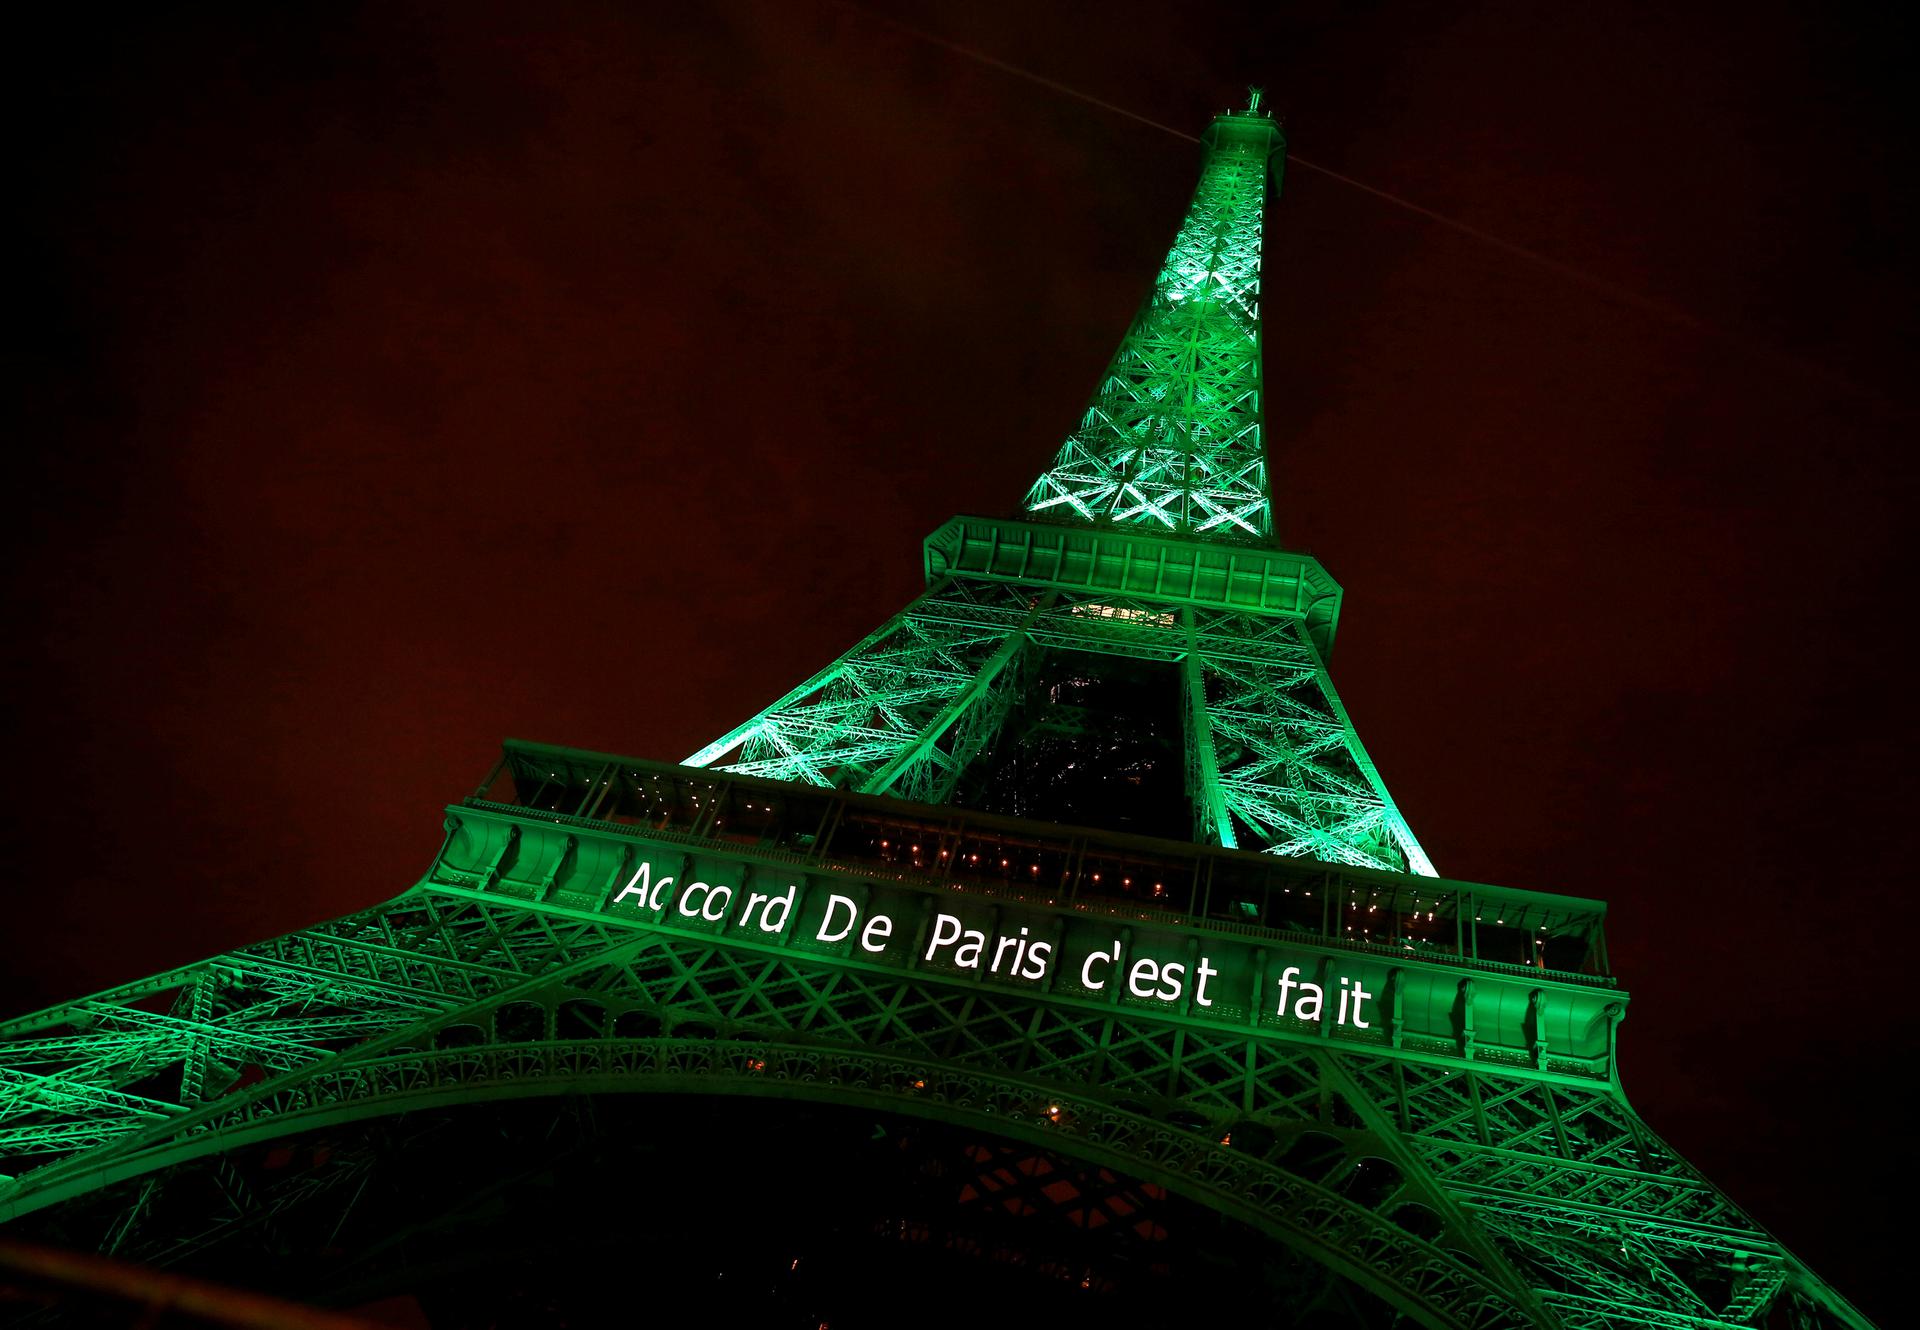 The Eiffel Tower lit up in green